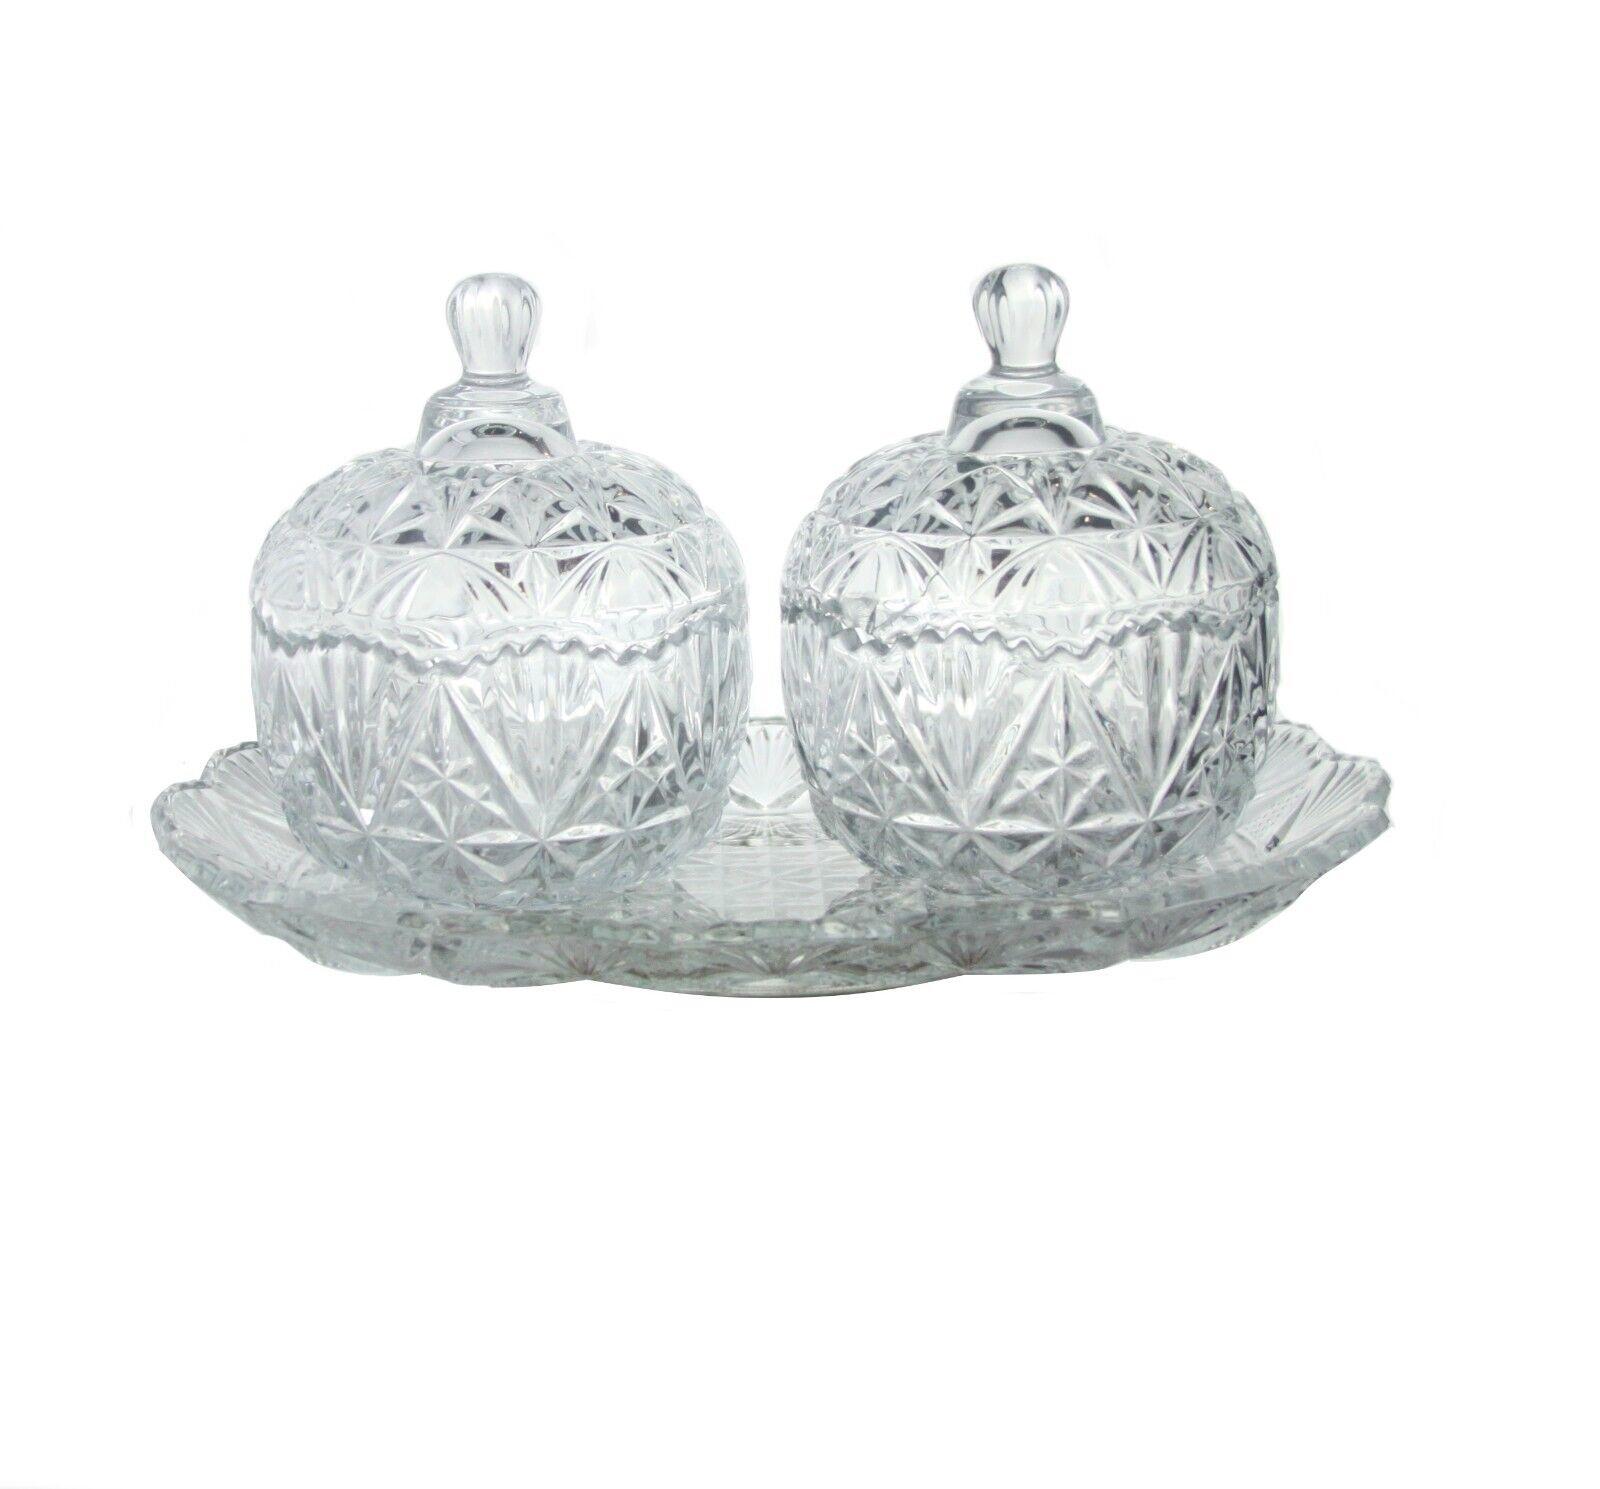 Details about   Boxed Set of 3 Decorative Glass Candy Pieces 